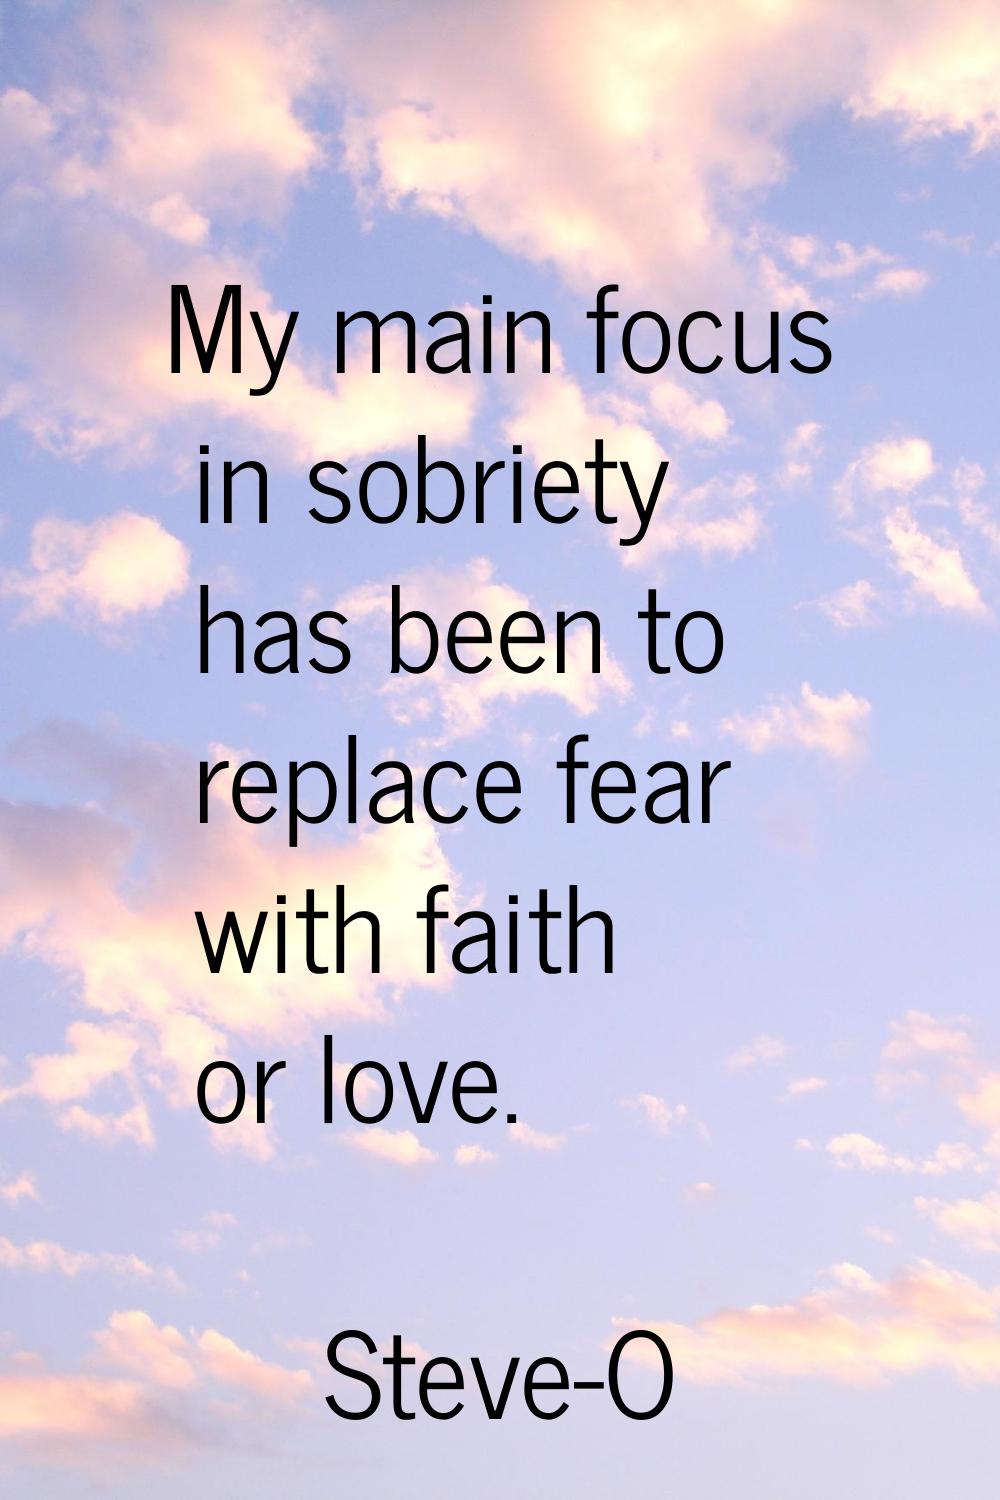 My main focus in sobriety has been to replace fear with faith or love.